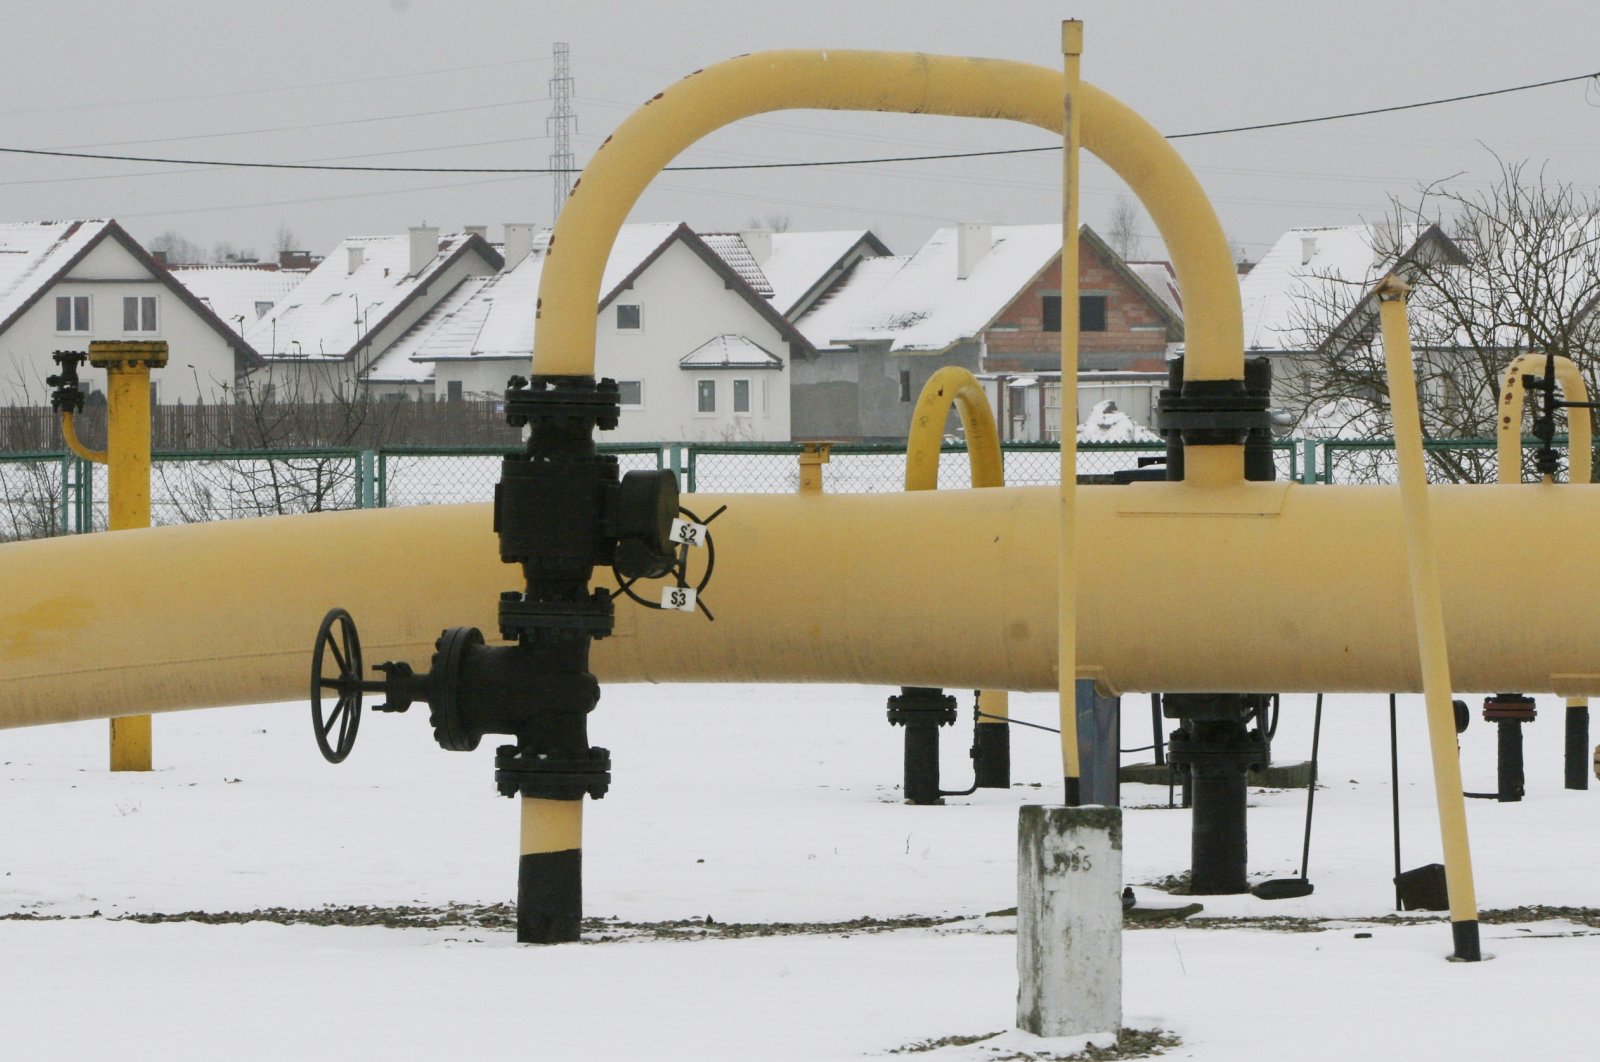 A natural gas pumping station for imported gas from Russia, in Rebelszczyzna, near Warsaw, Poland, Jan. 7, 2009. (AP Photo)